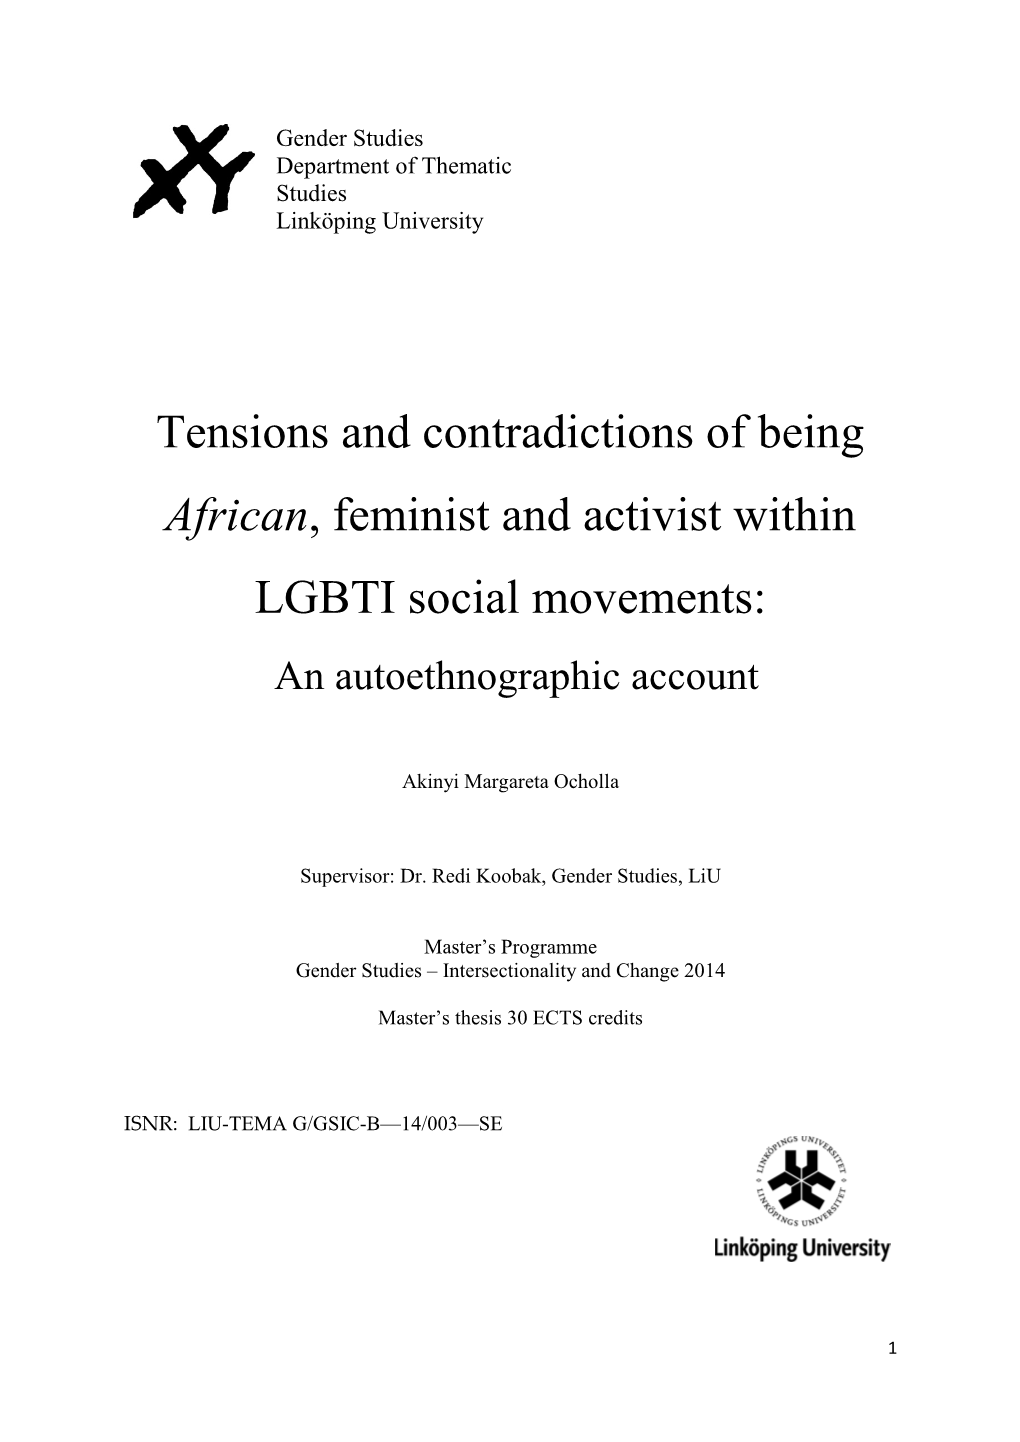 Tensions and Contradictions of Being African, Feminist and Activist Within Sexual and Gender Minority Social Movements